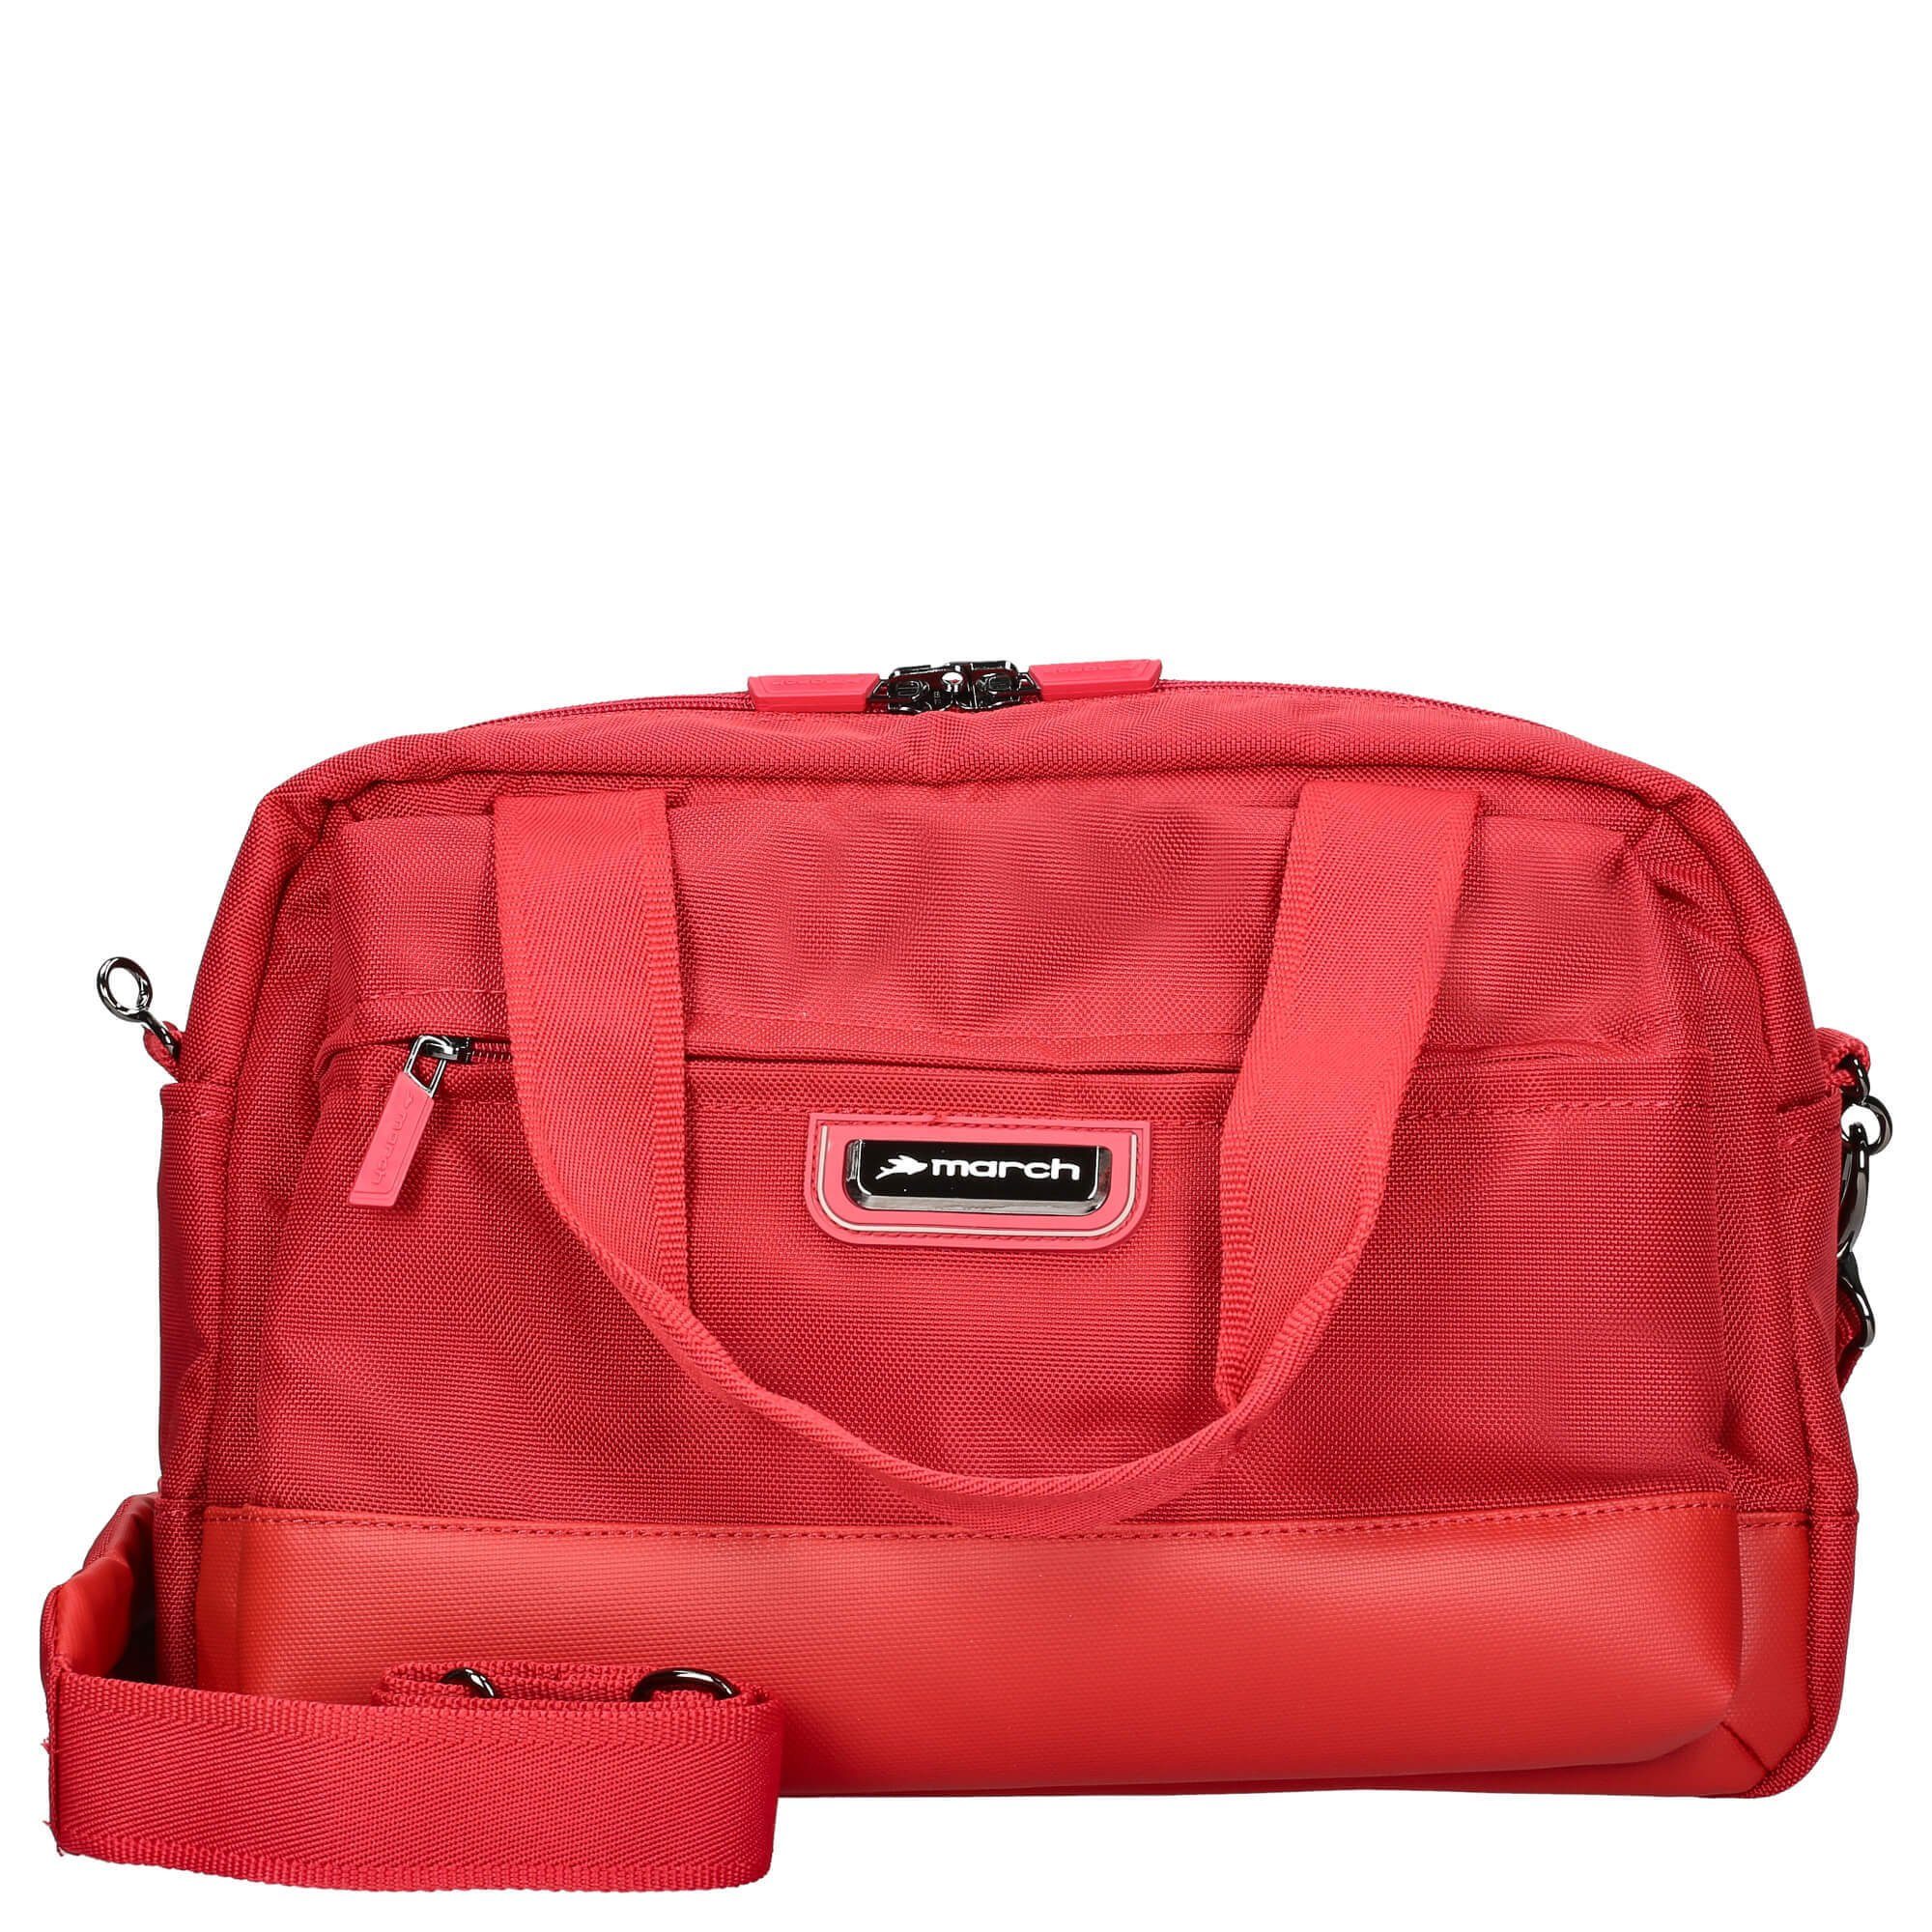 March15 Trading Businesstasche Rolling Bags stow a´way - Umhängetasche 38 cm red